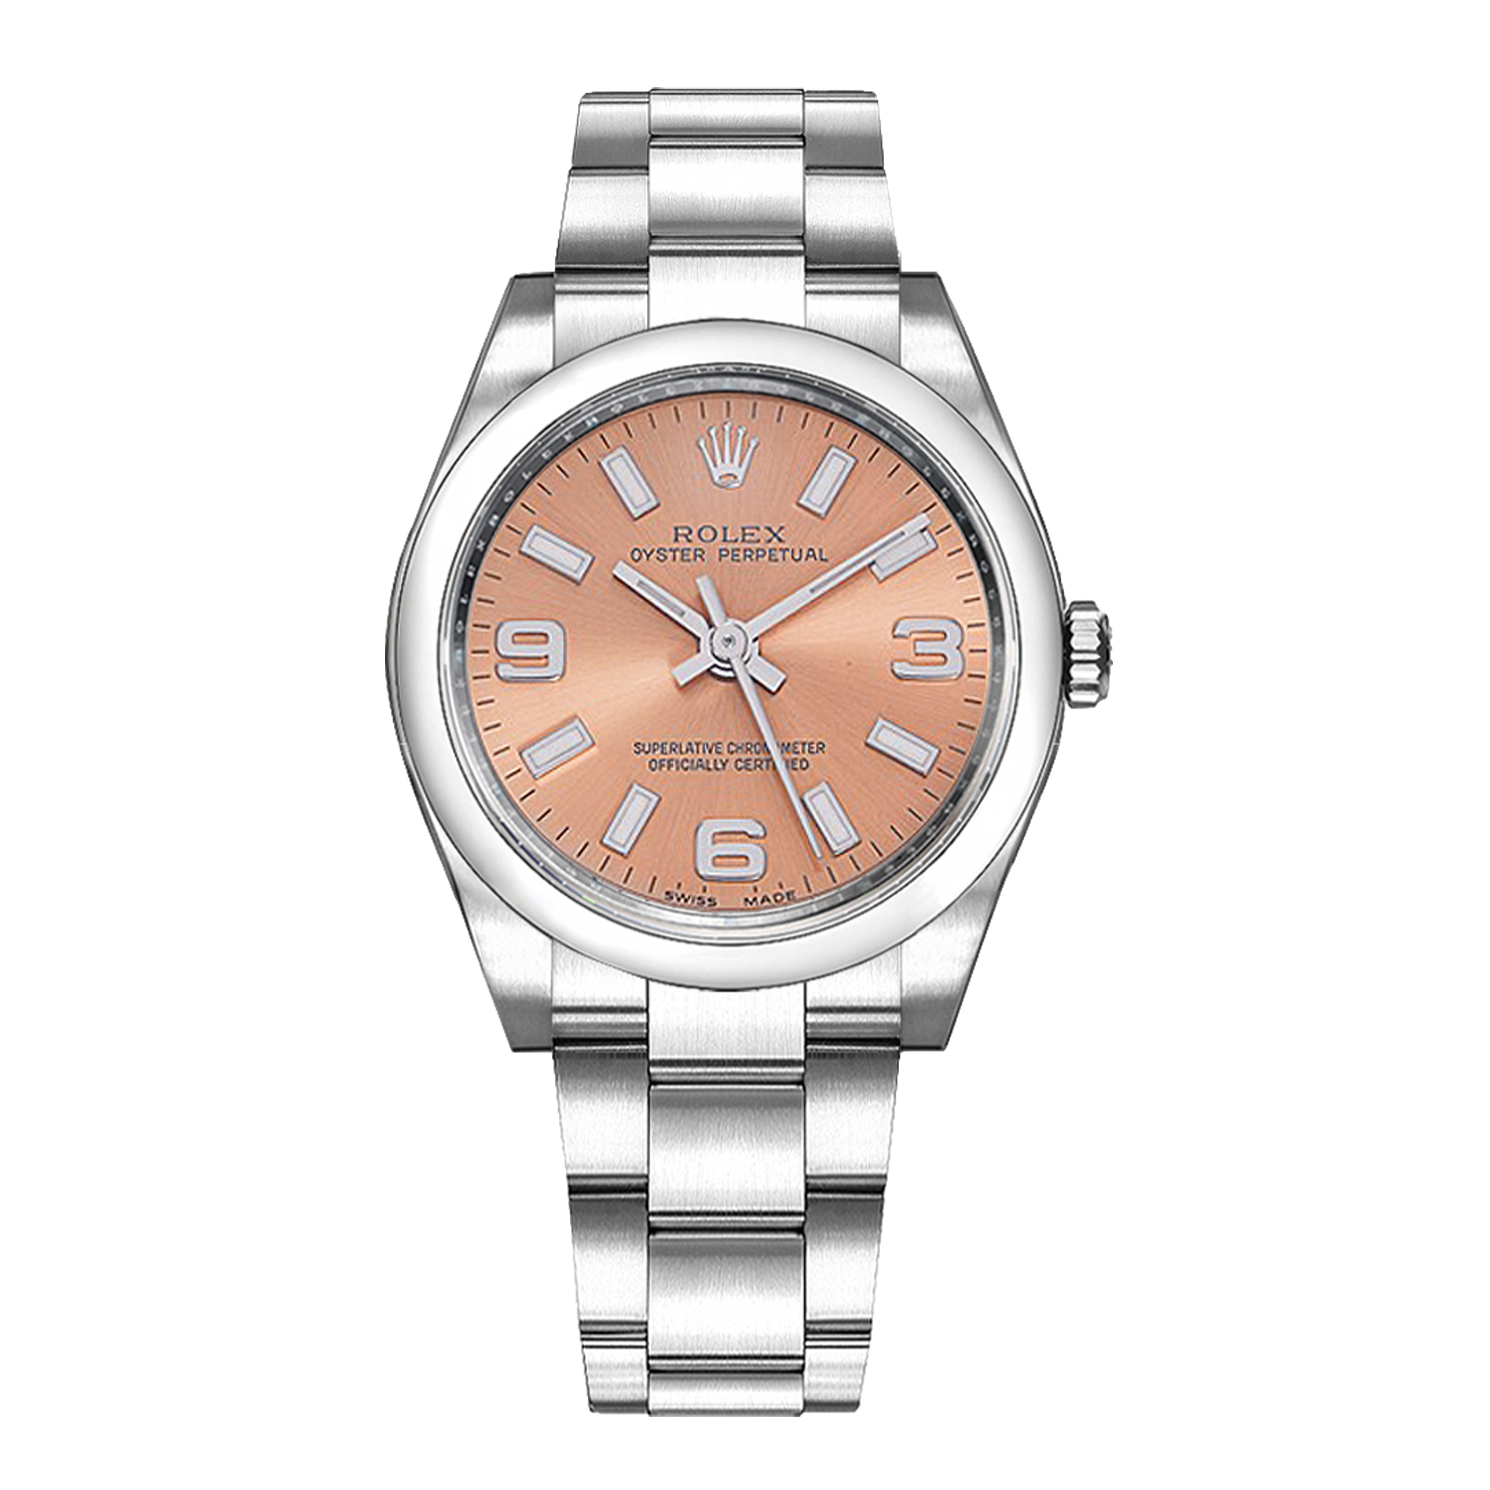 Rolex Oyster Perpetual 114200 | Watchdreamer